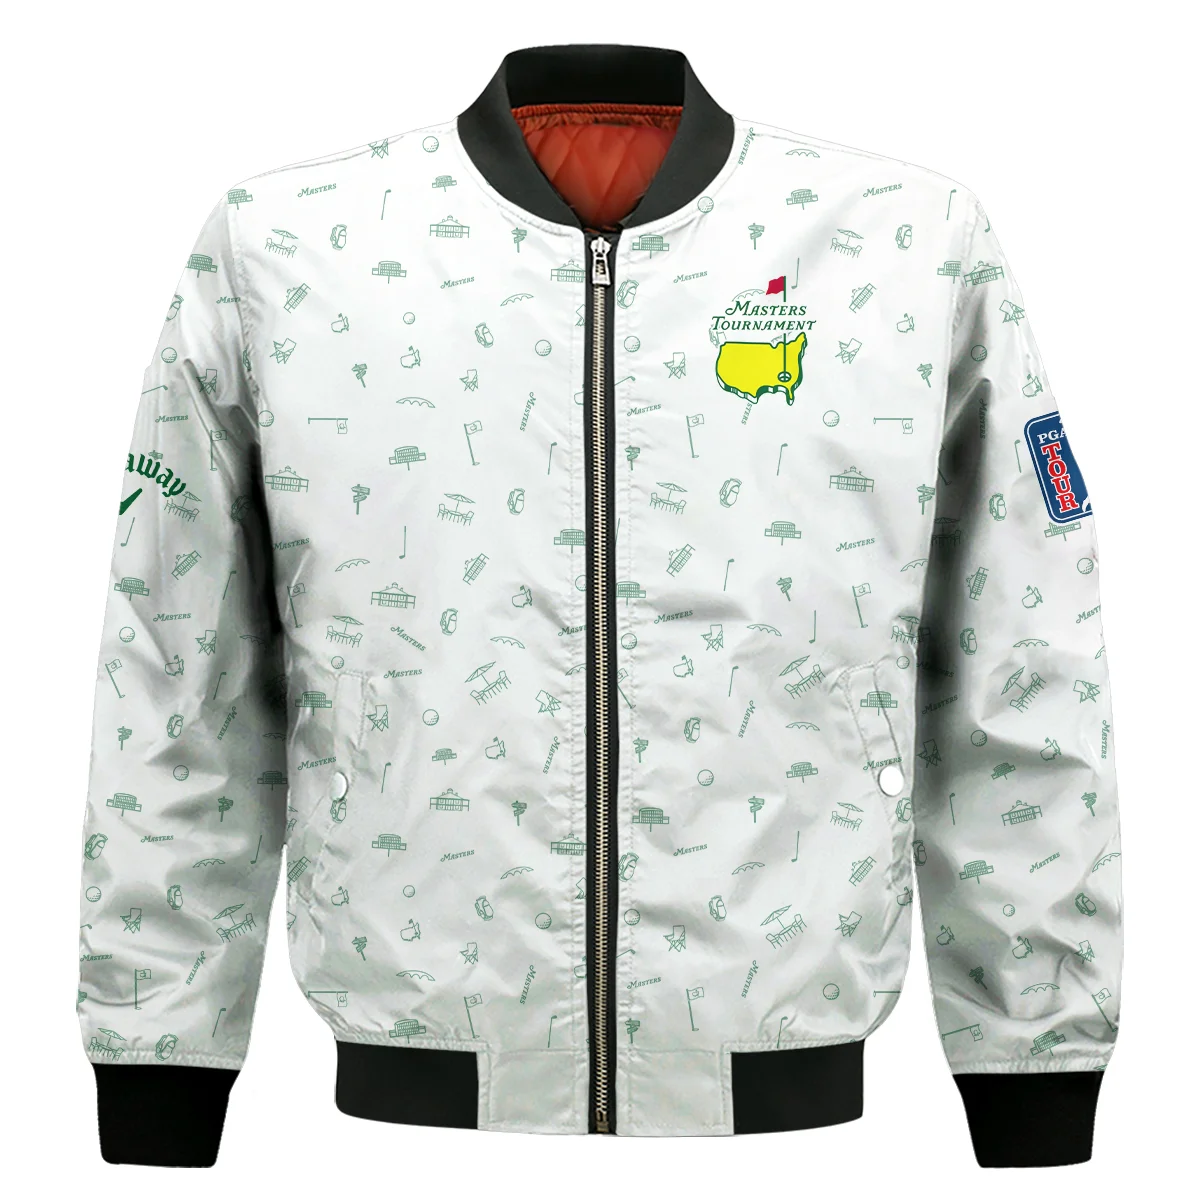 Golf Masters Tournament Callaway Bomber Jacket Augusta Icons Pattern White Green Golf Sports Bomber Jacket GBJ1317